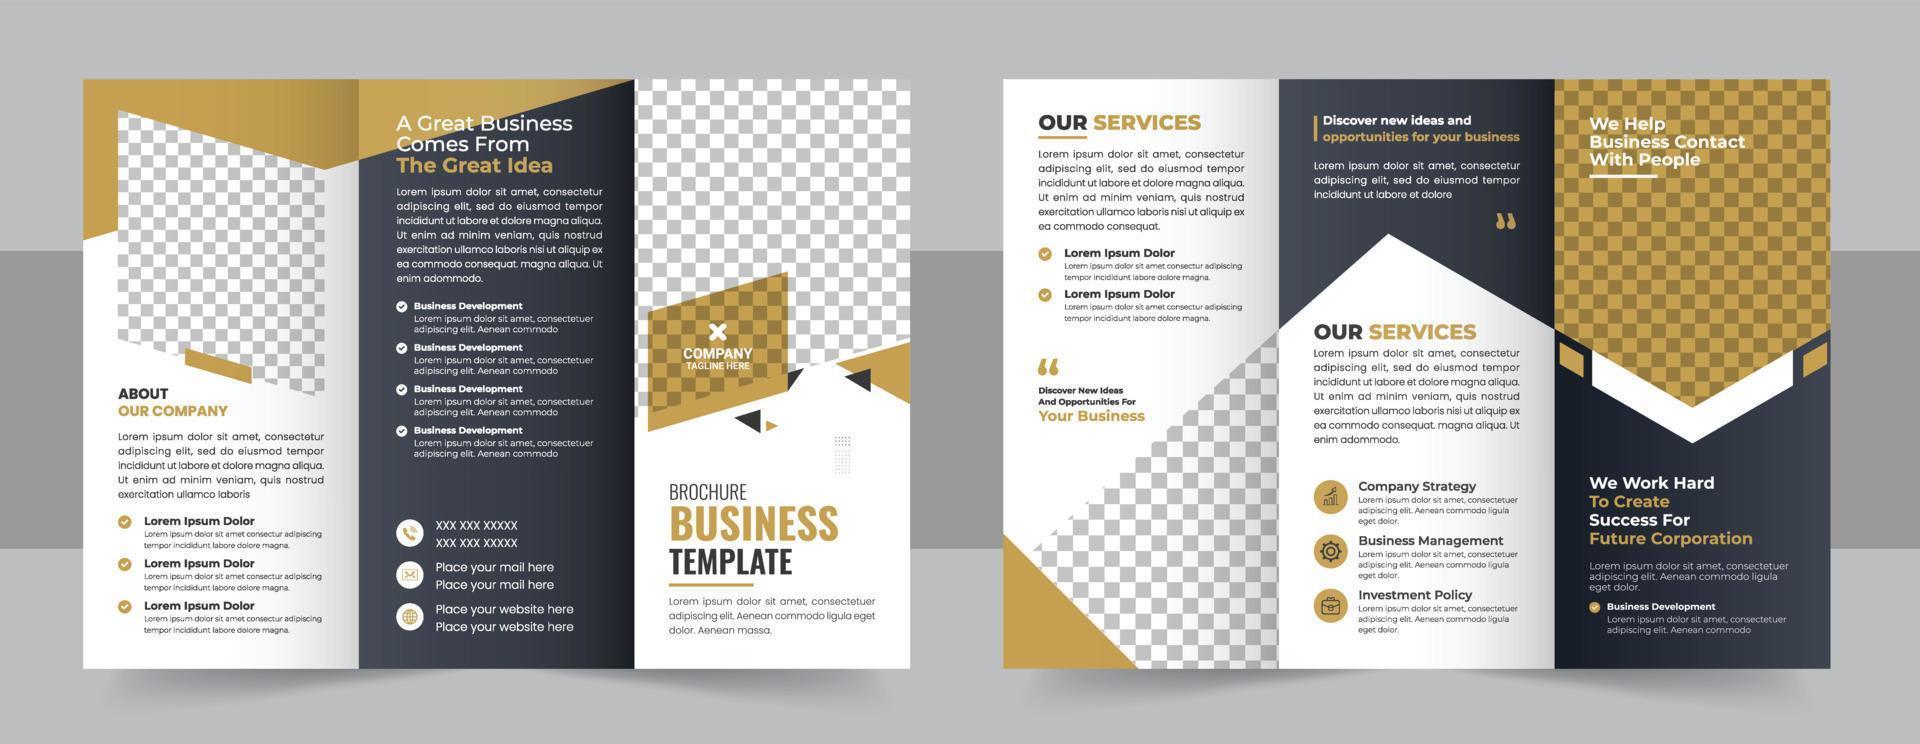 Corporate business trifold brochure template, Creative and Professional tri fold brochure vector design, Professional Brochure Template